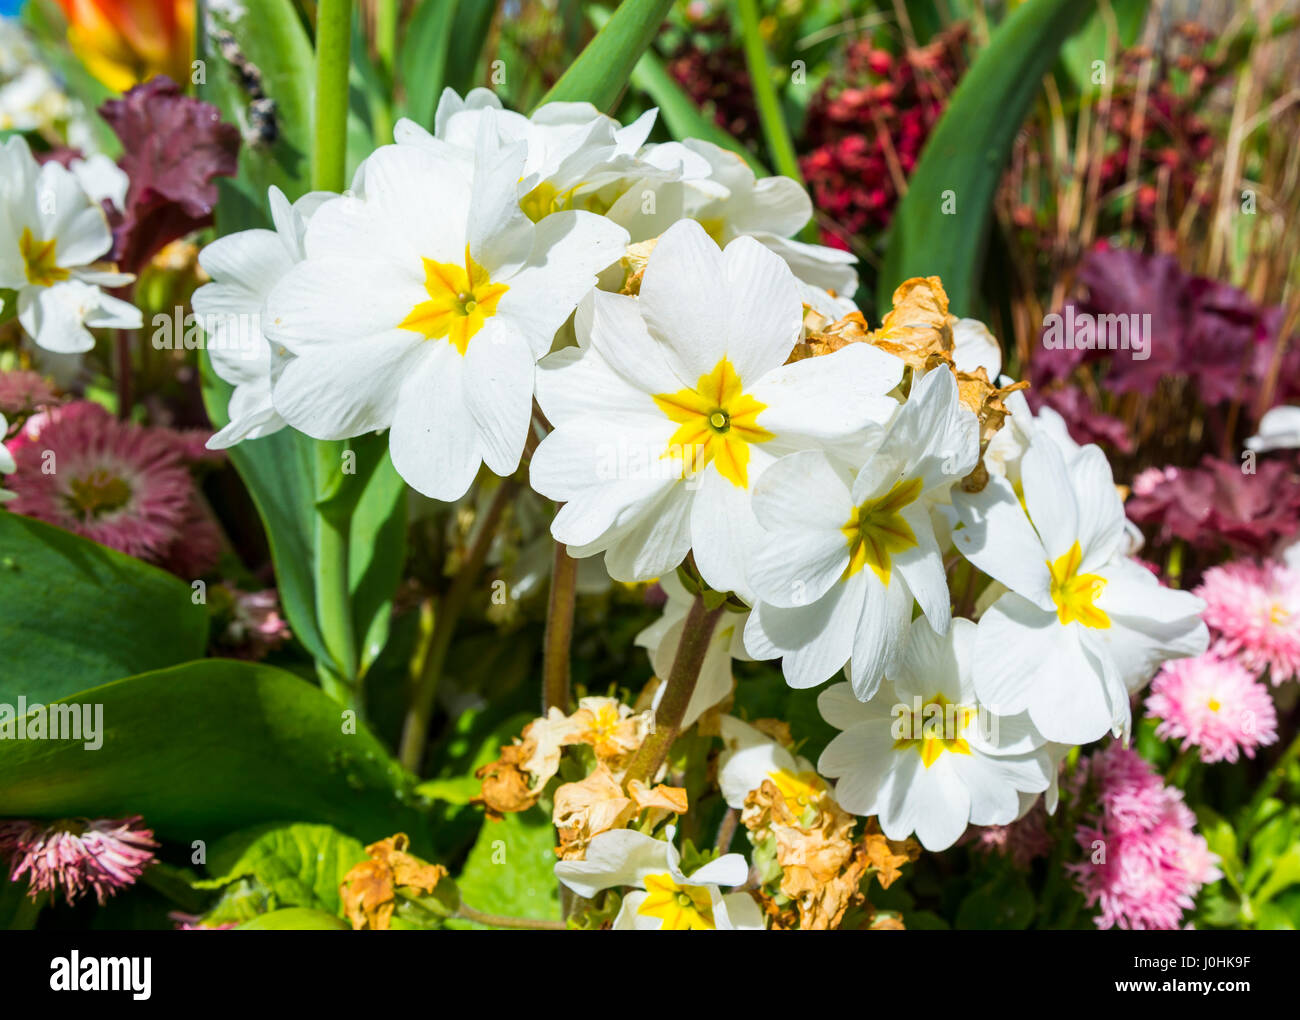 Flowers from a white Primrose plant (Primula) with yellow eye, in a decorative flowerbed in a small town in Spring, in West Sussex, England, UK. Stock Photo